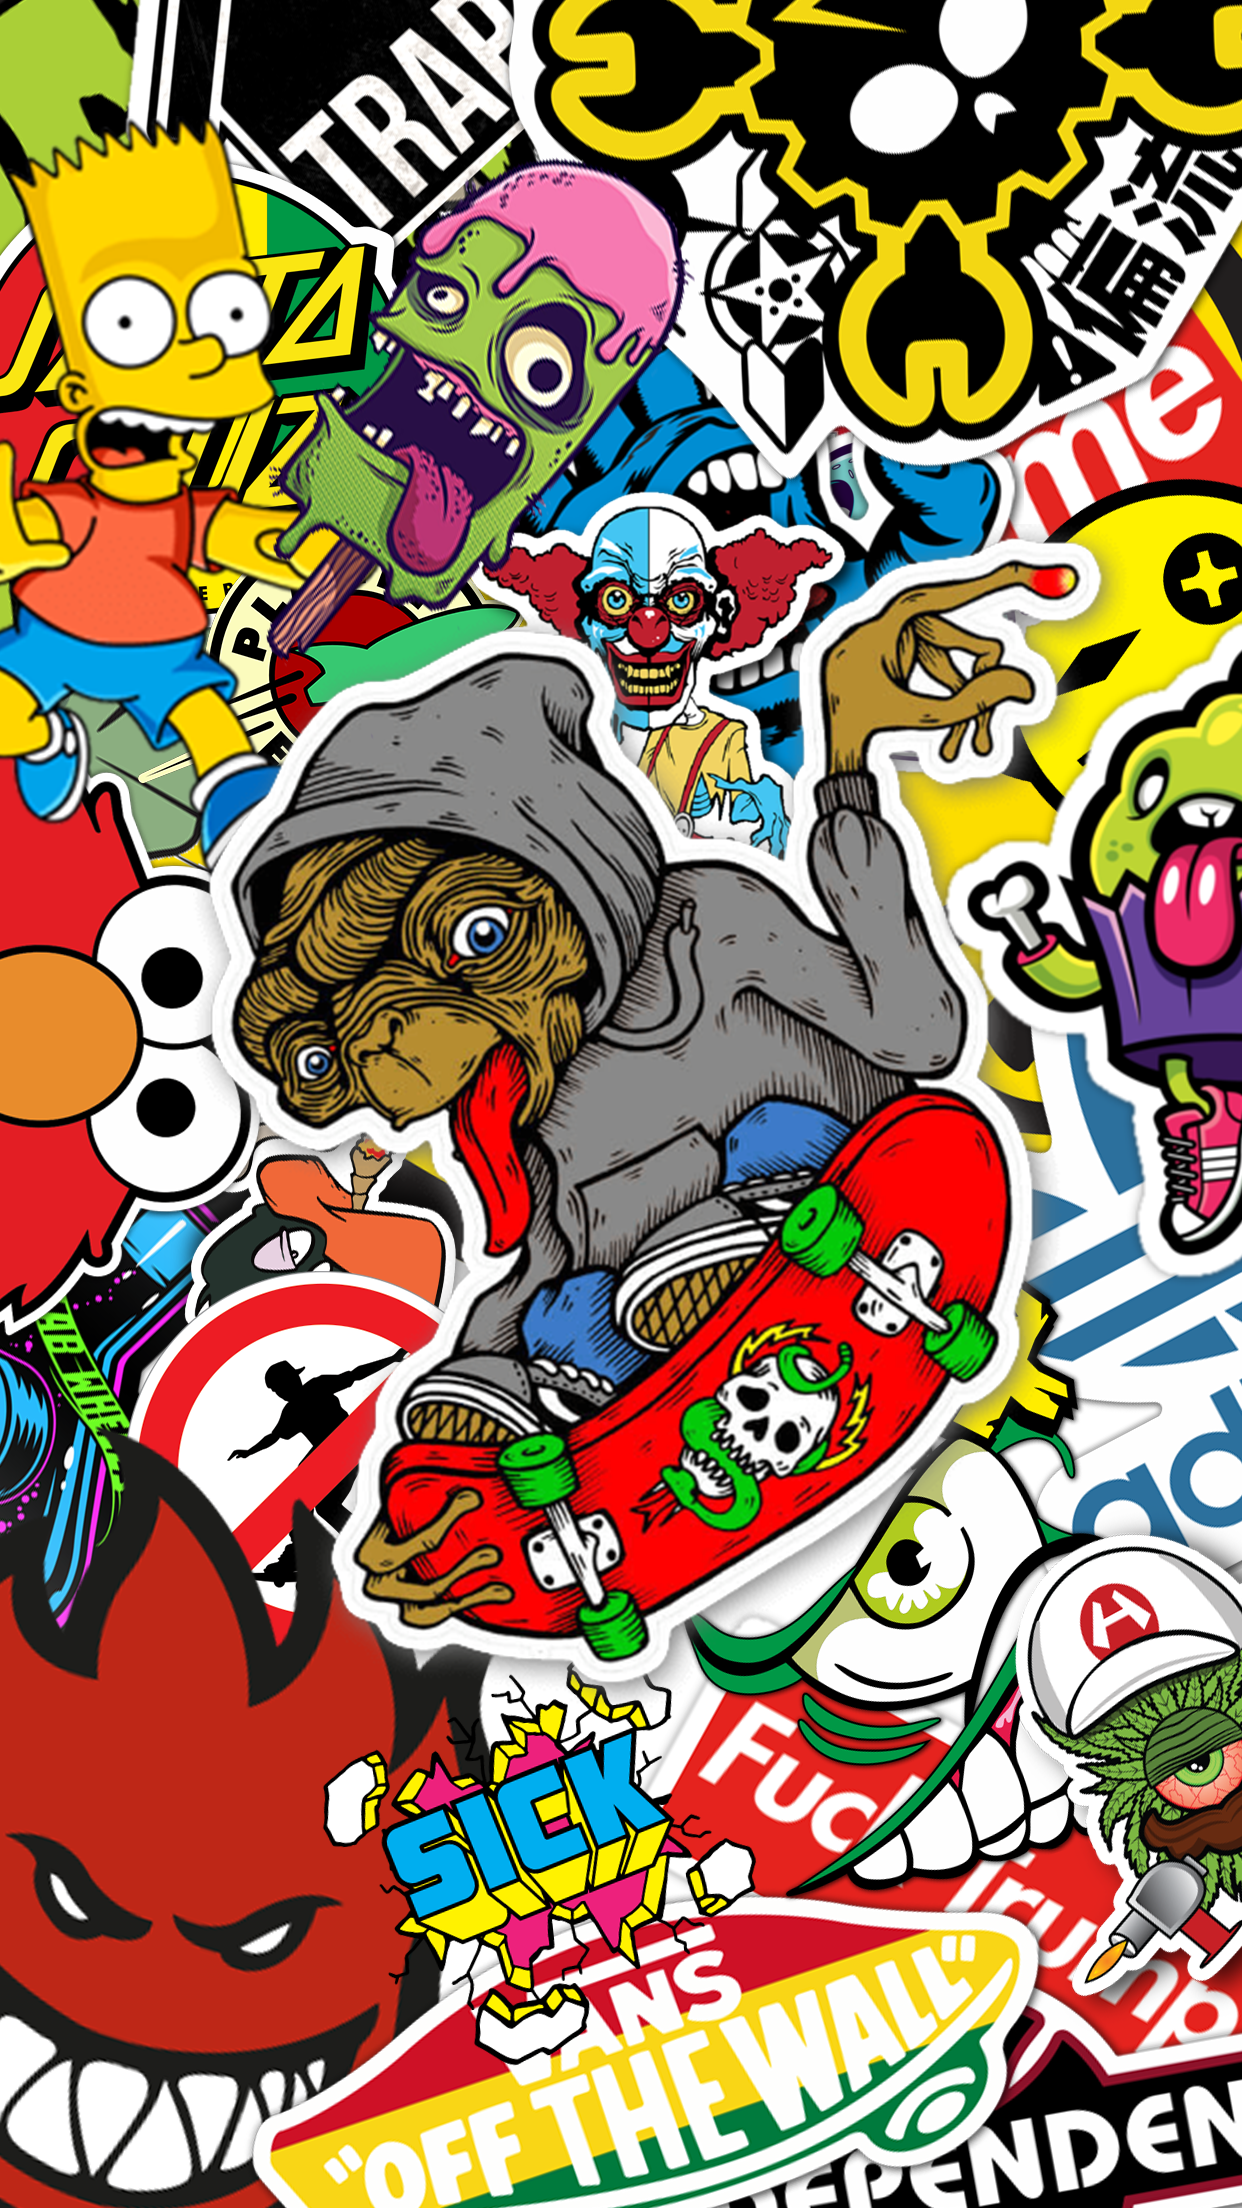 Skate Stickers Wallpapers - Wallpaper Cave